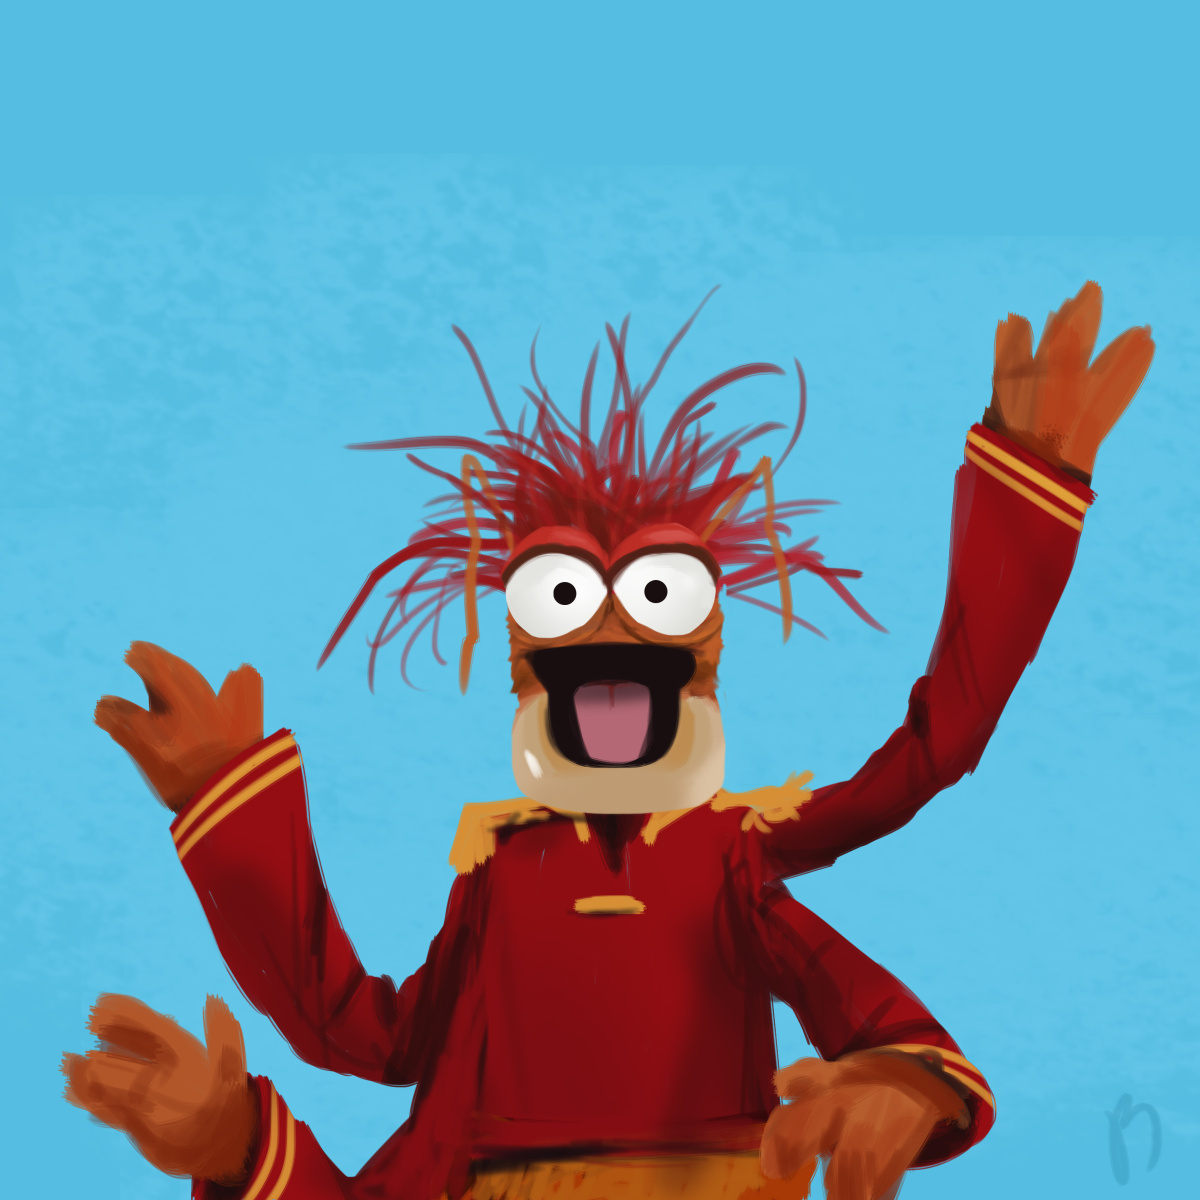 Pepe the King Prawn screenshots, image and picture